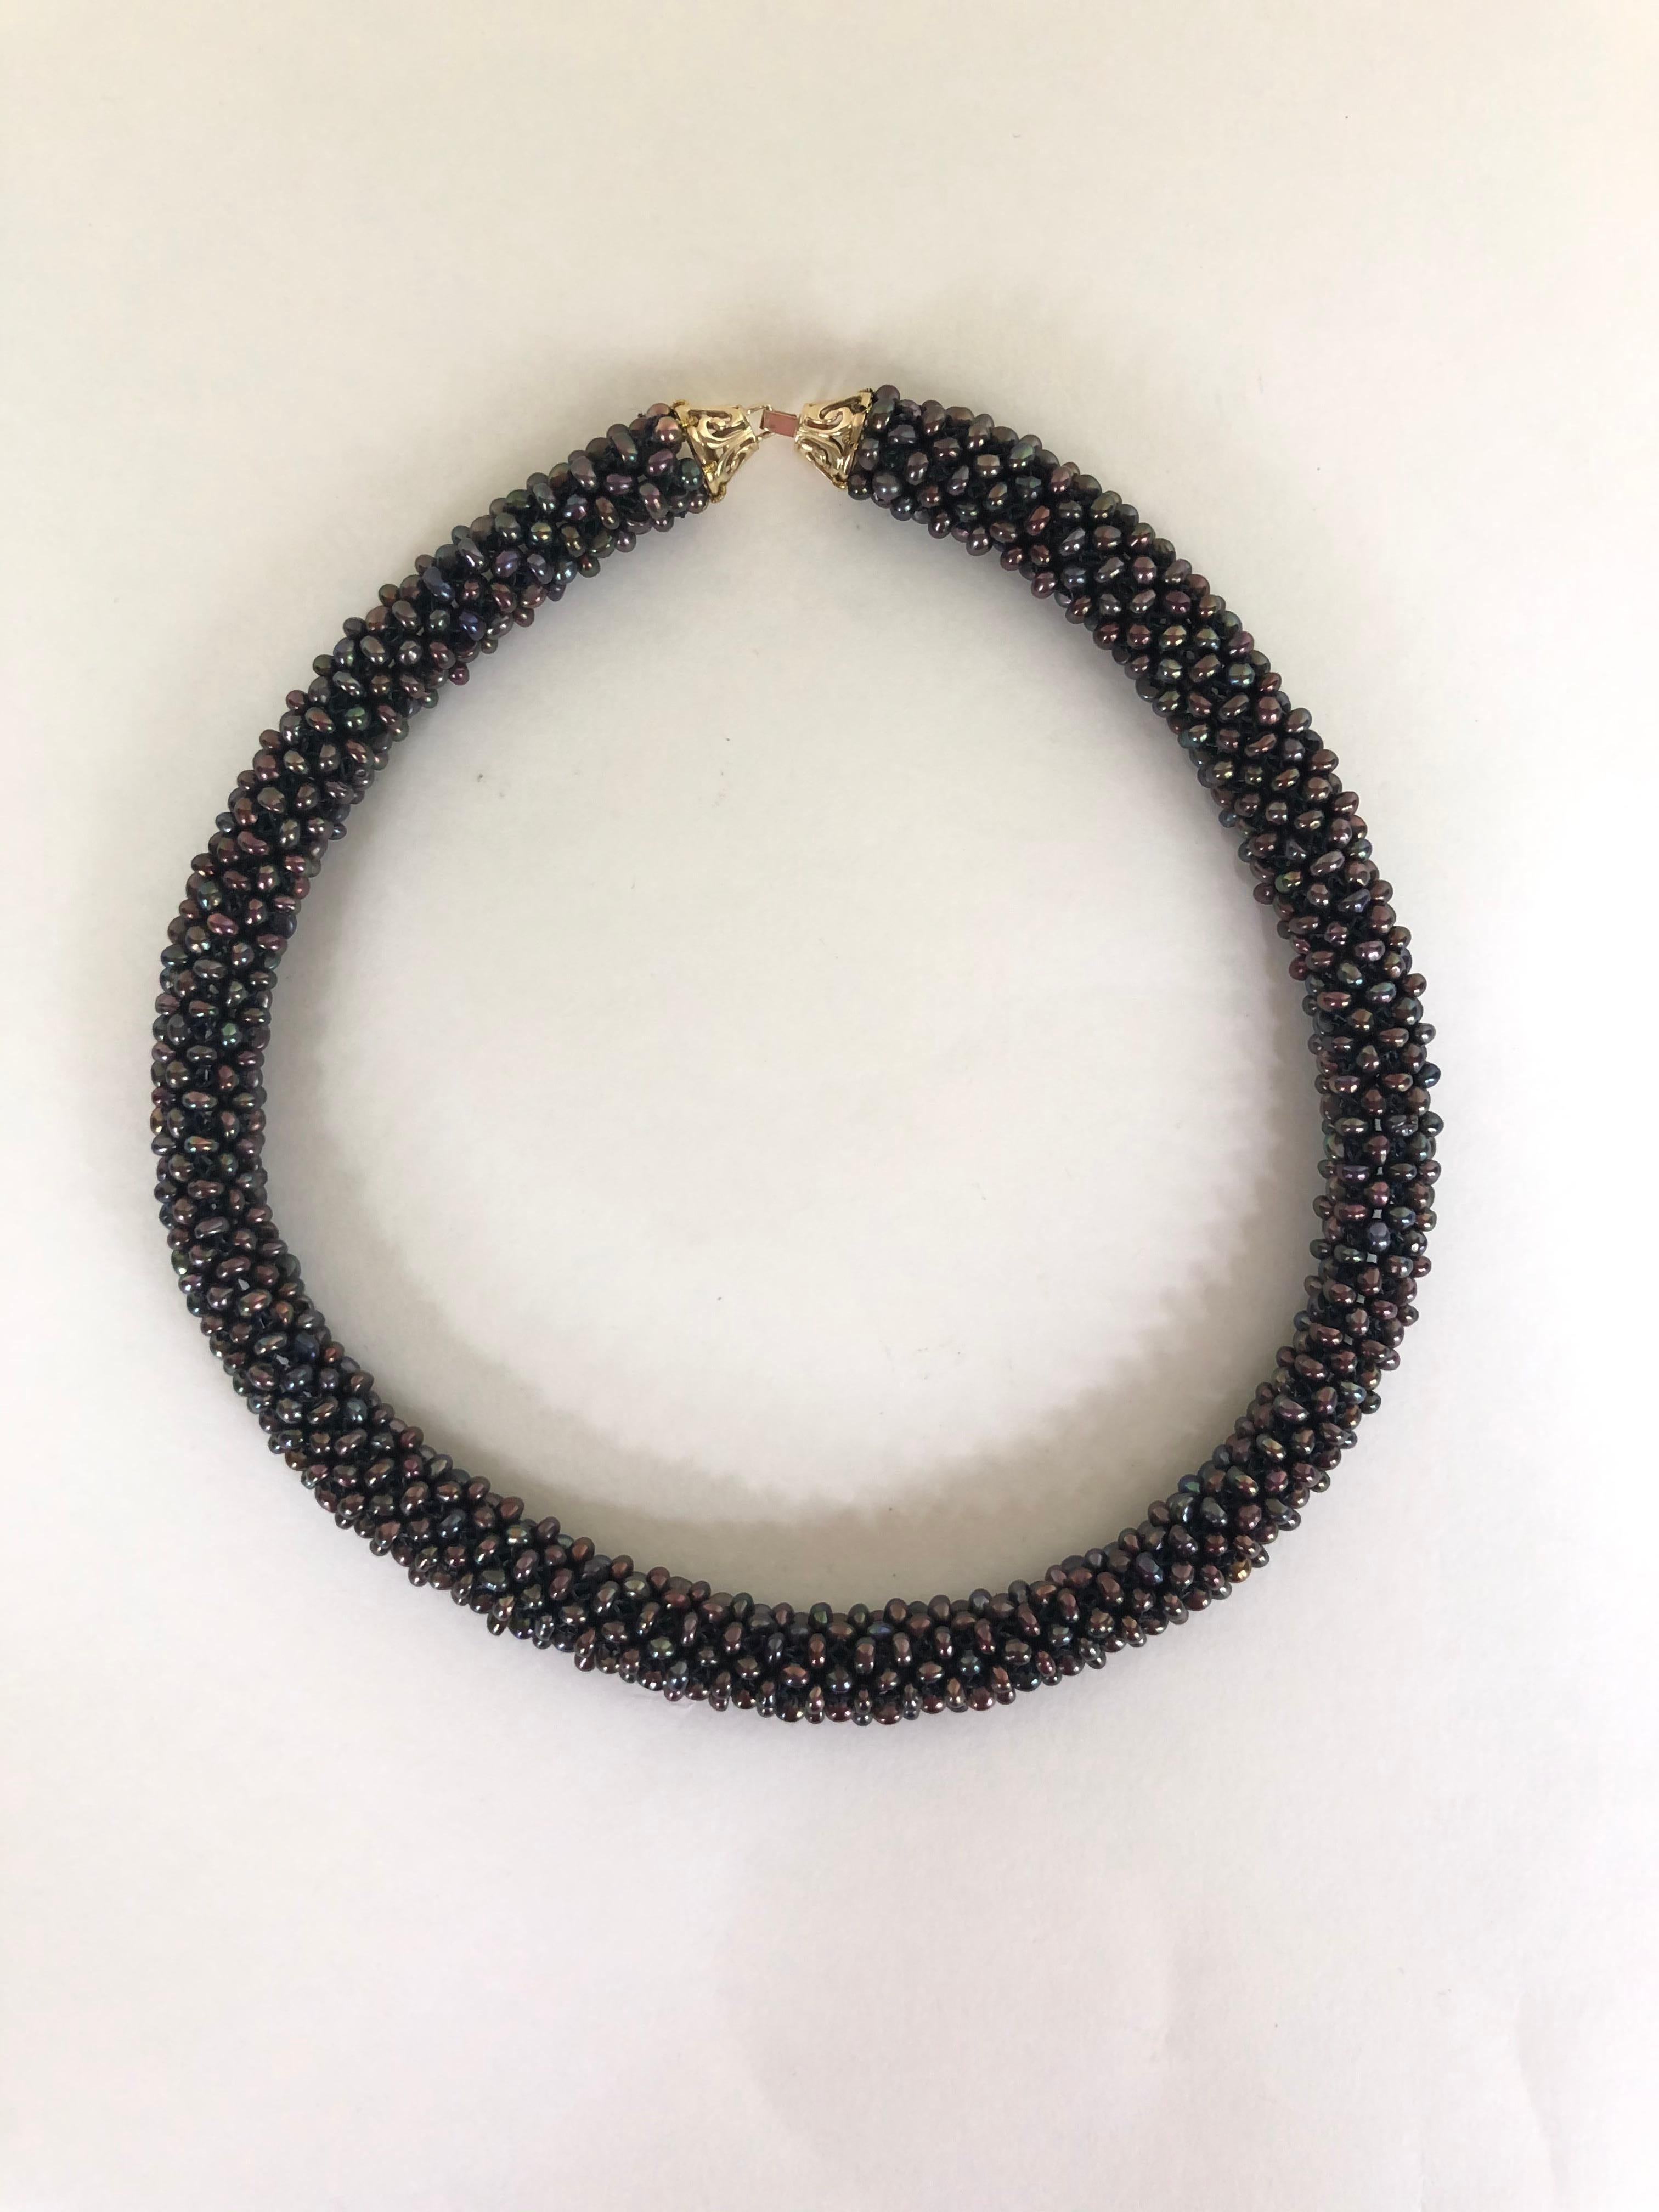 Artisan Marina J 3-D (rope like) Unique Black Pearl Necklace with 14 k Yellow Gold Clasp